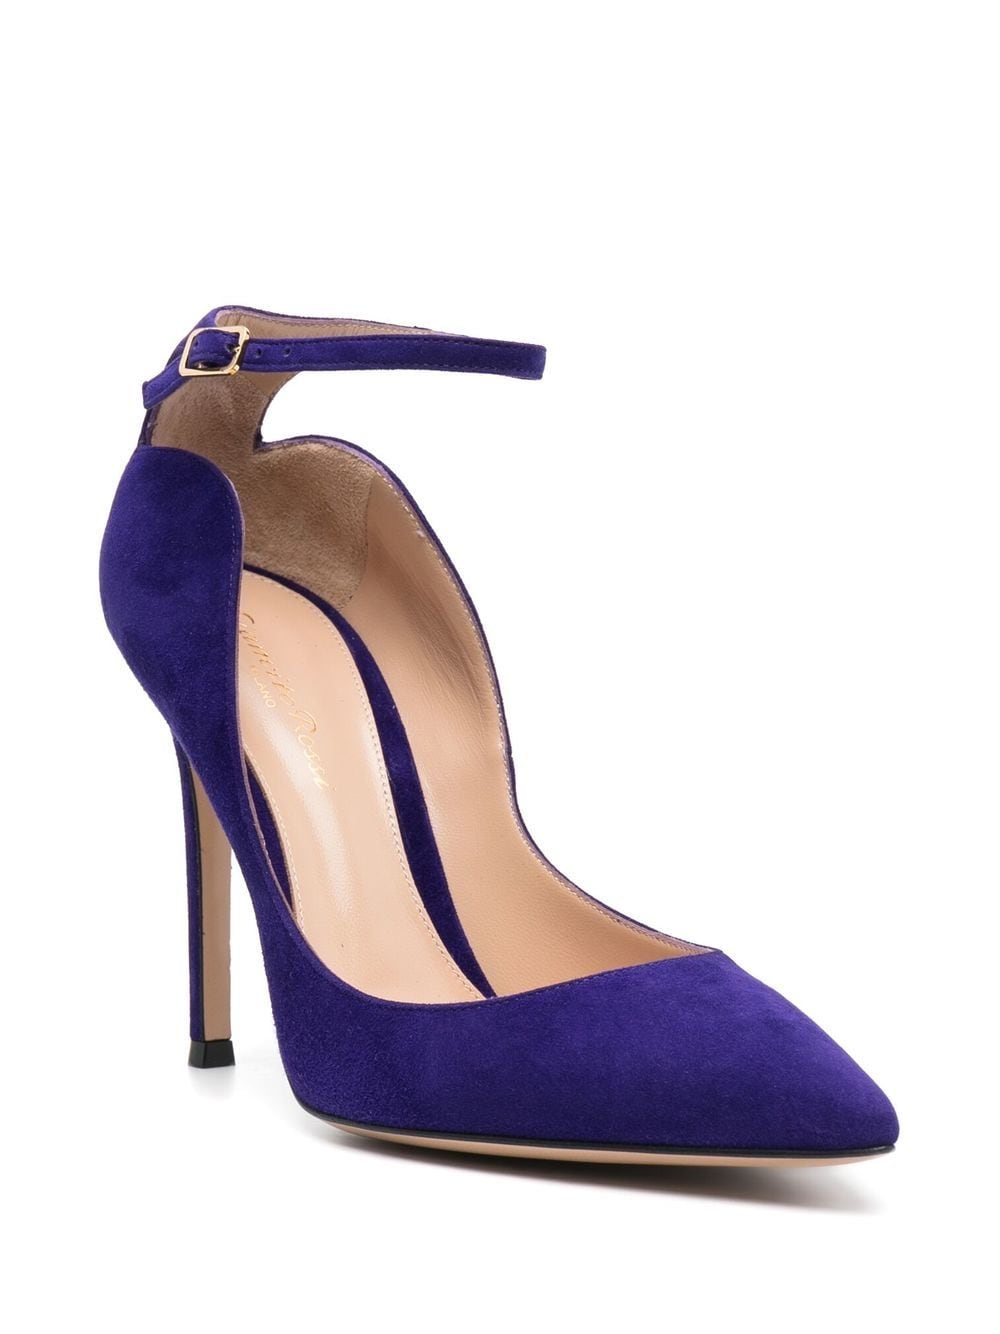 gianvito rossi pointed-toe ankle strap 105mm pumps - purple